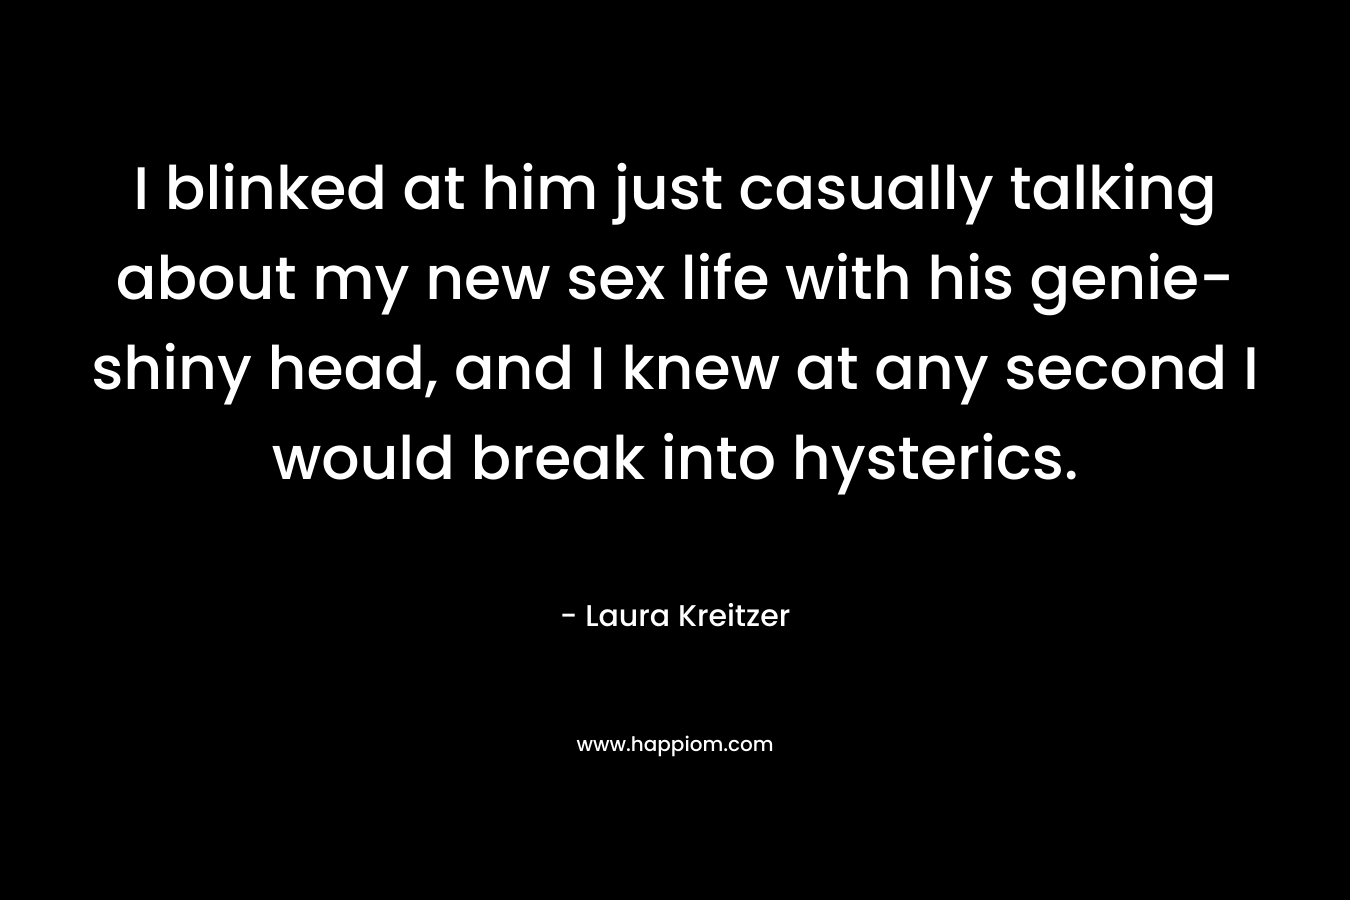 I blinked at him just casually talking about my new sex life with his genie-shiny head, and I knew at any second I would break into hysterics. – Laura Kreitzer